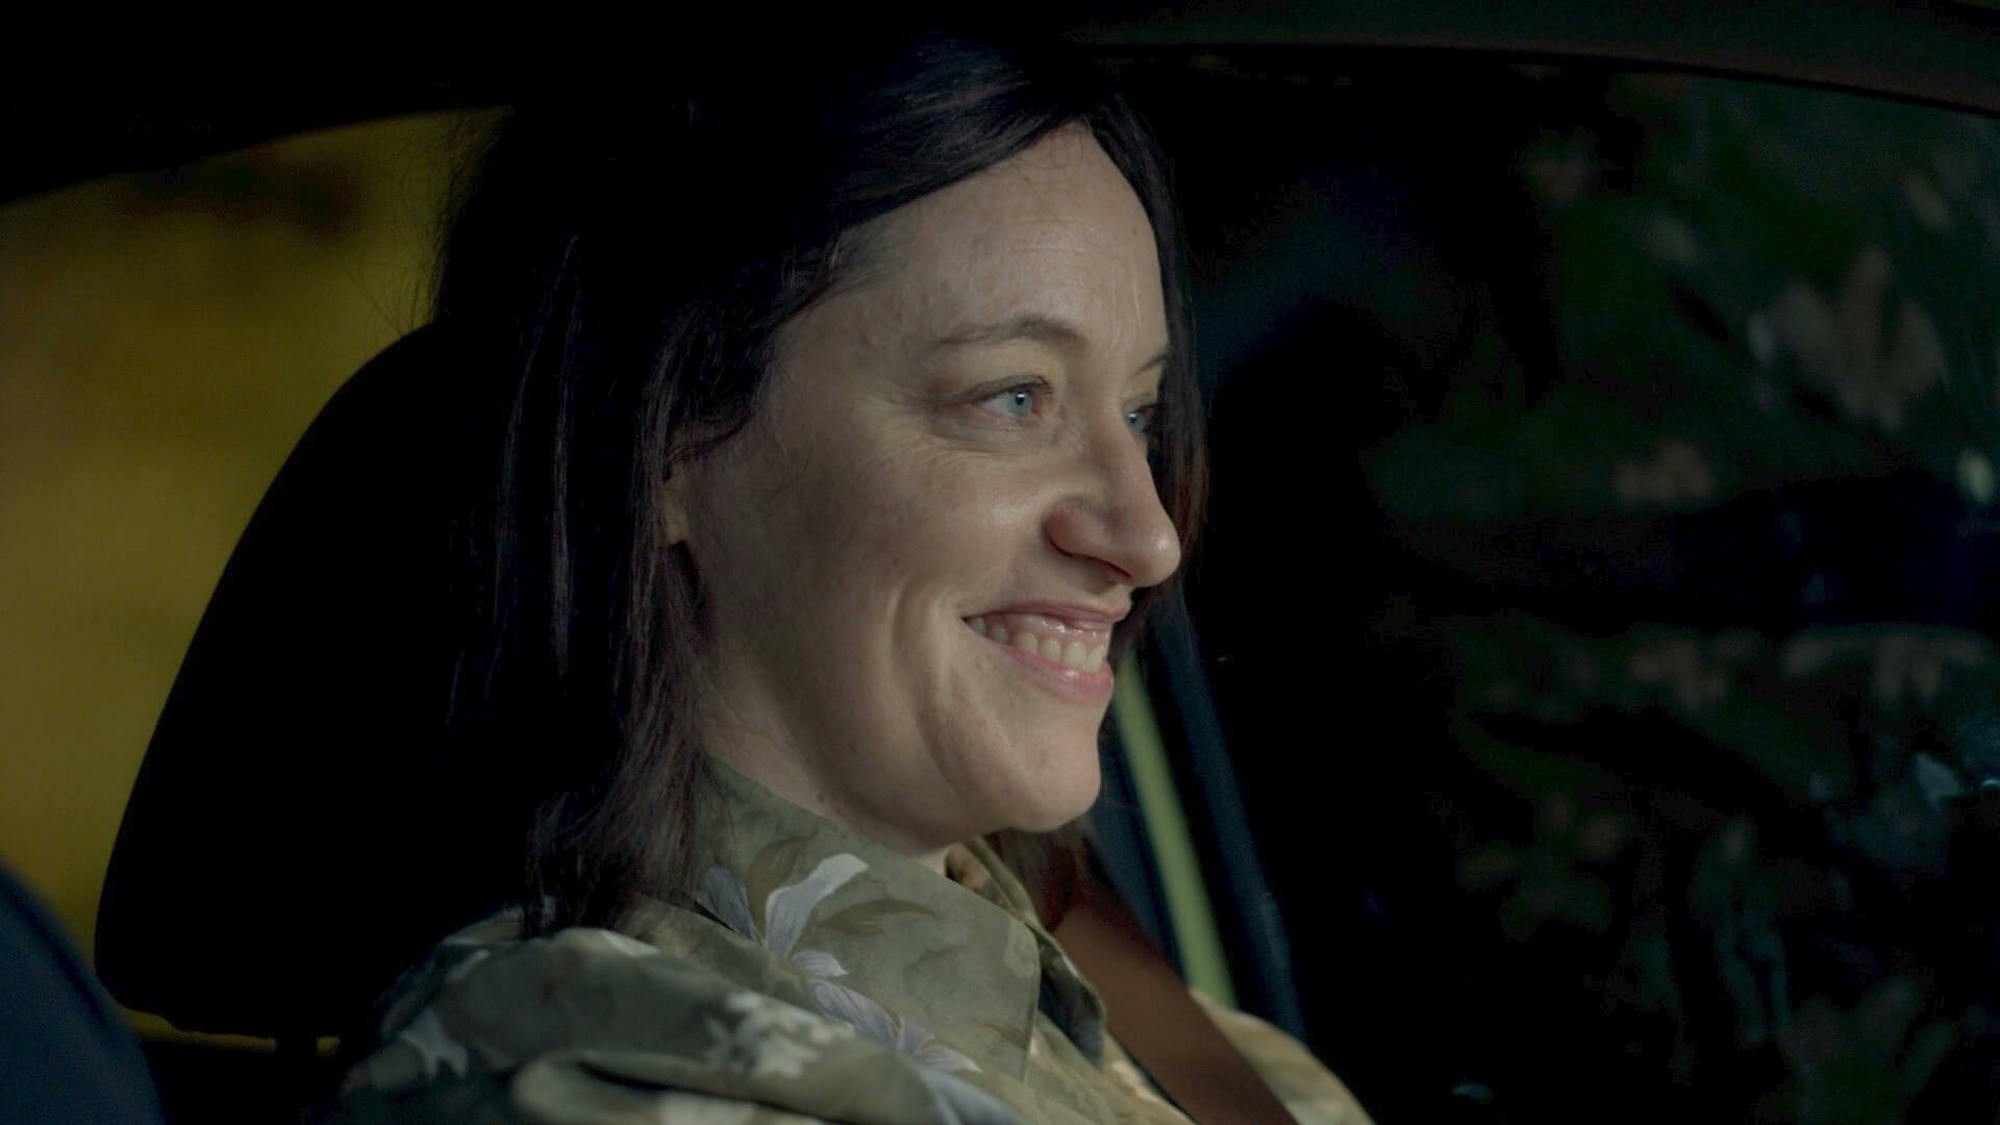 Tovi Shtisel (Eliana Shechter) sits in a car, with a gleeful yet mischievous smile on her face. She wears the same green patterned top, and it is dark.